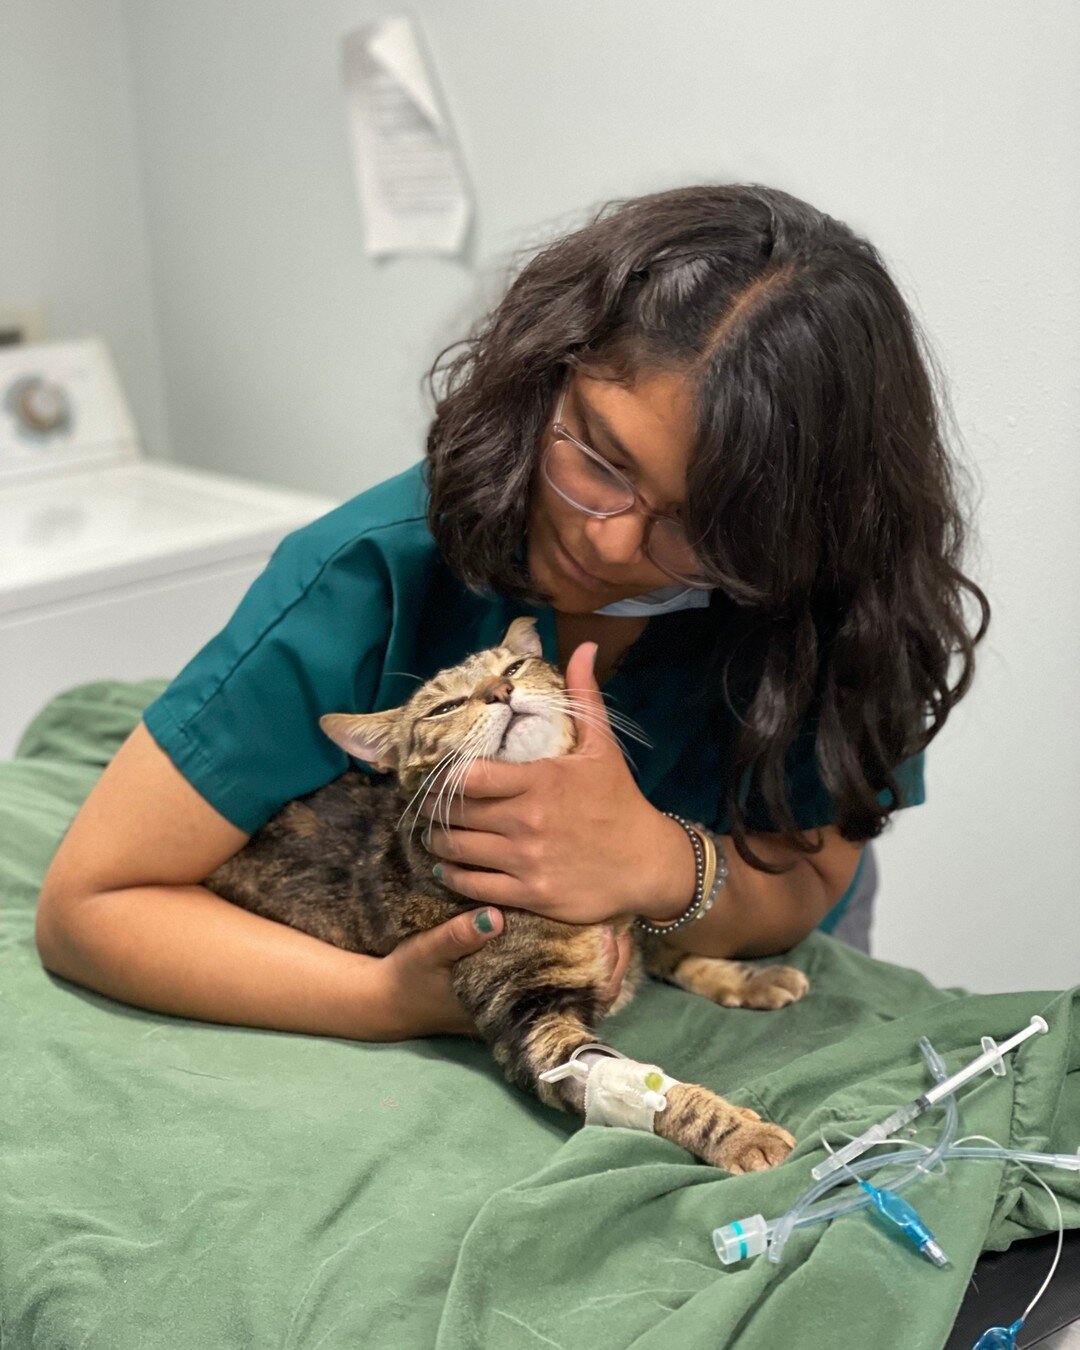 The phrase &ldquo;you&rsquo;re driving me up the wall&rdquo; took on a very literal meaning when our clinic cat Prince came up against a not-so-friendly escape artist dog. He came out the other side with frazzled nerves and an abdominal hernia. Lucki